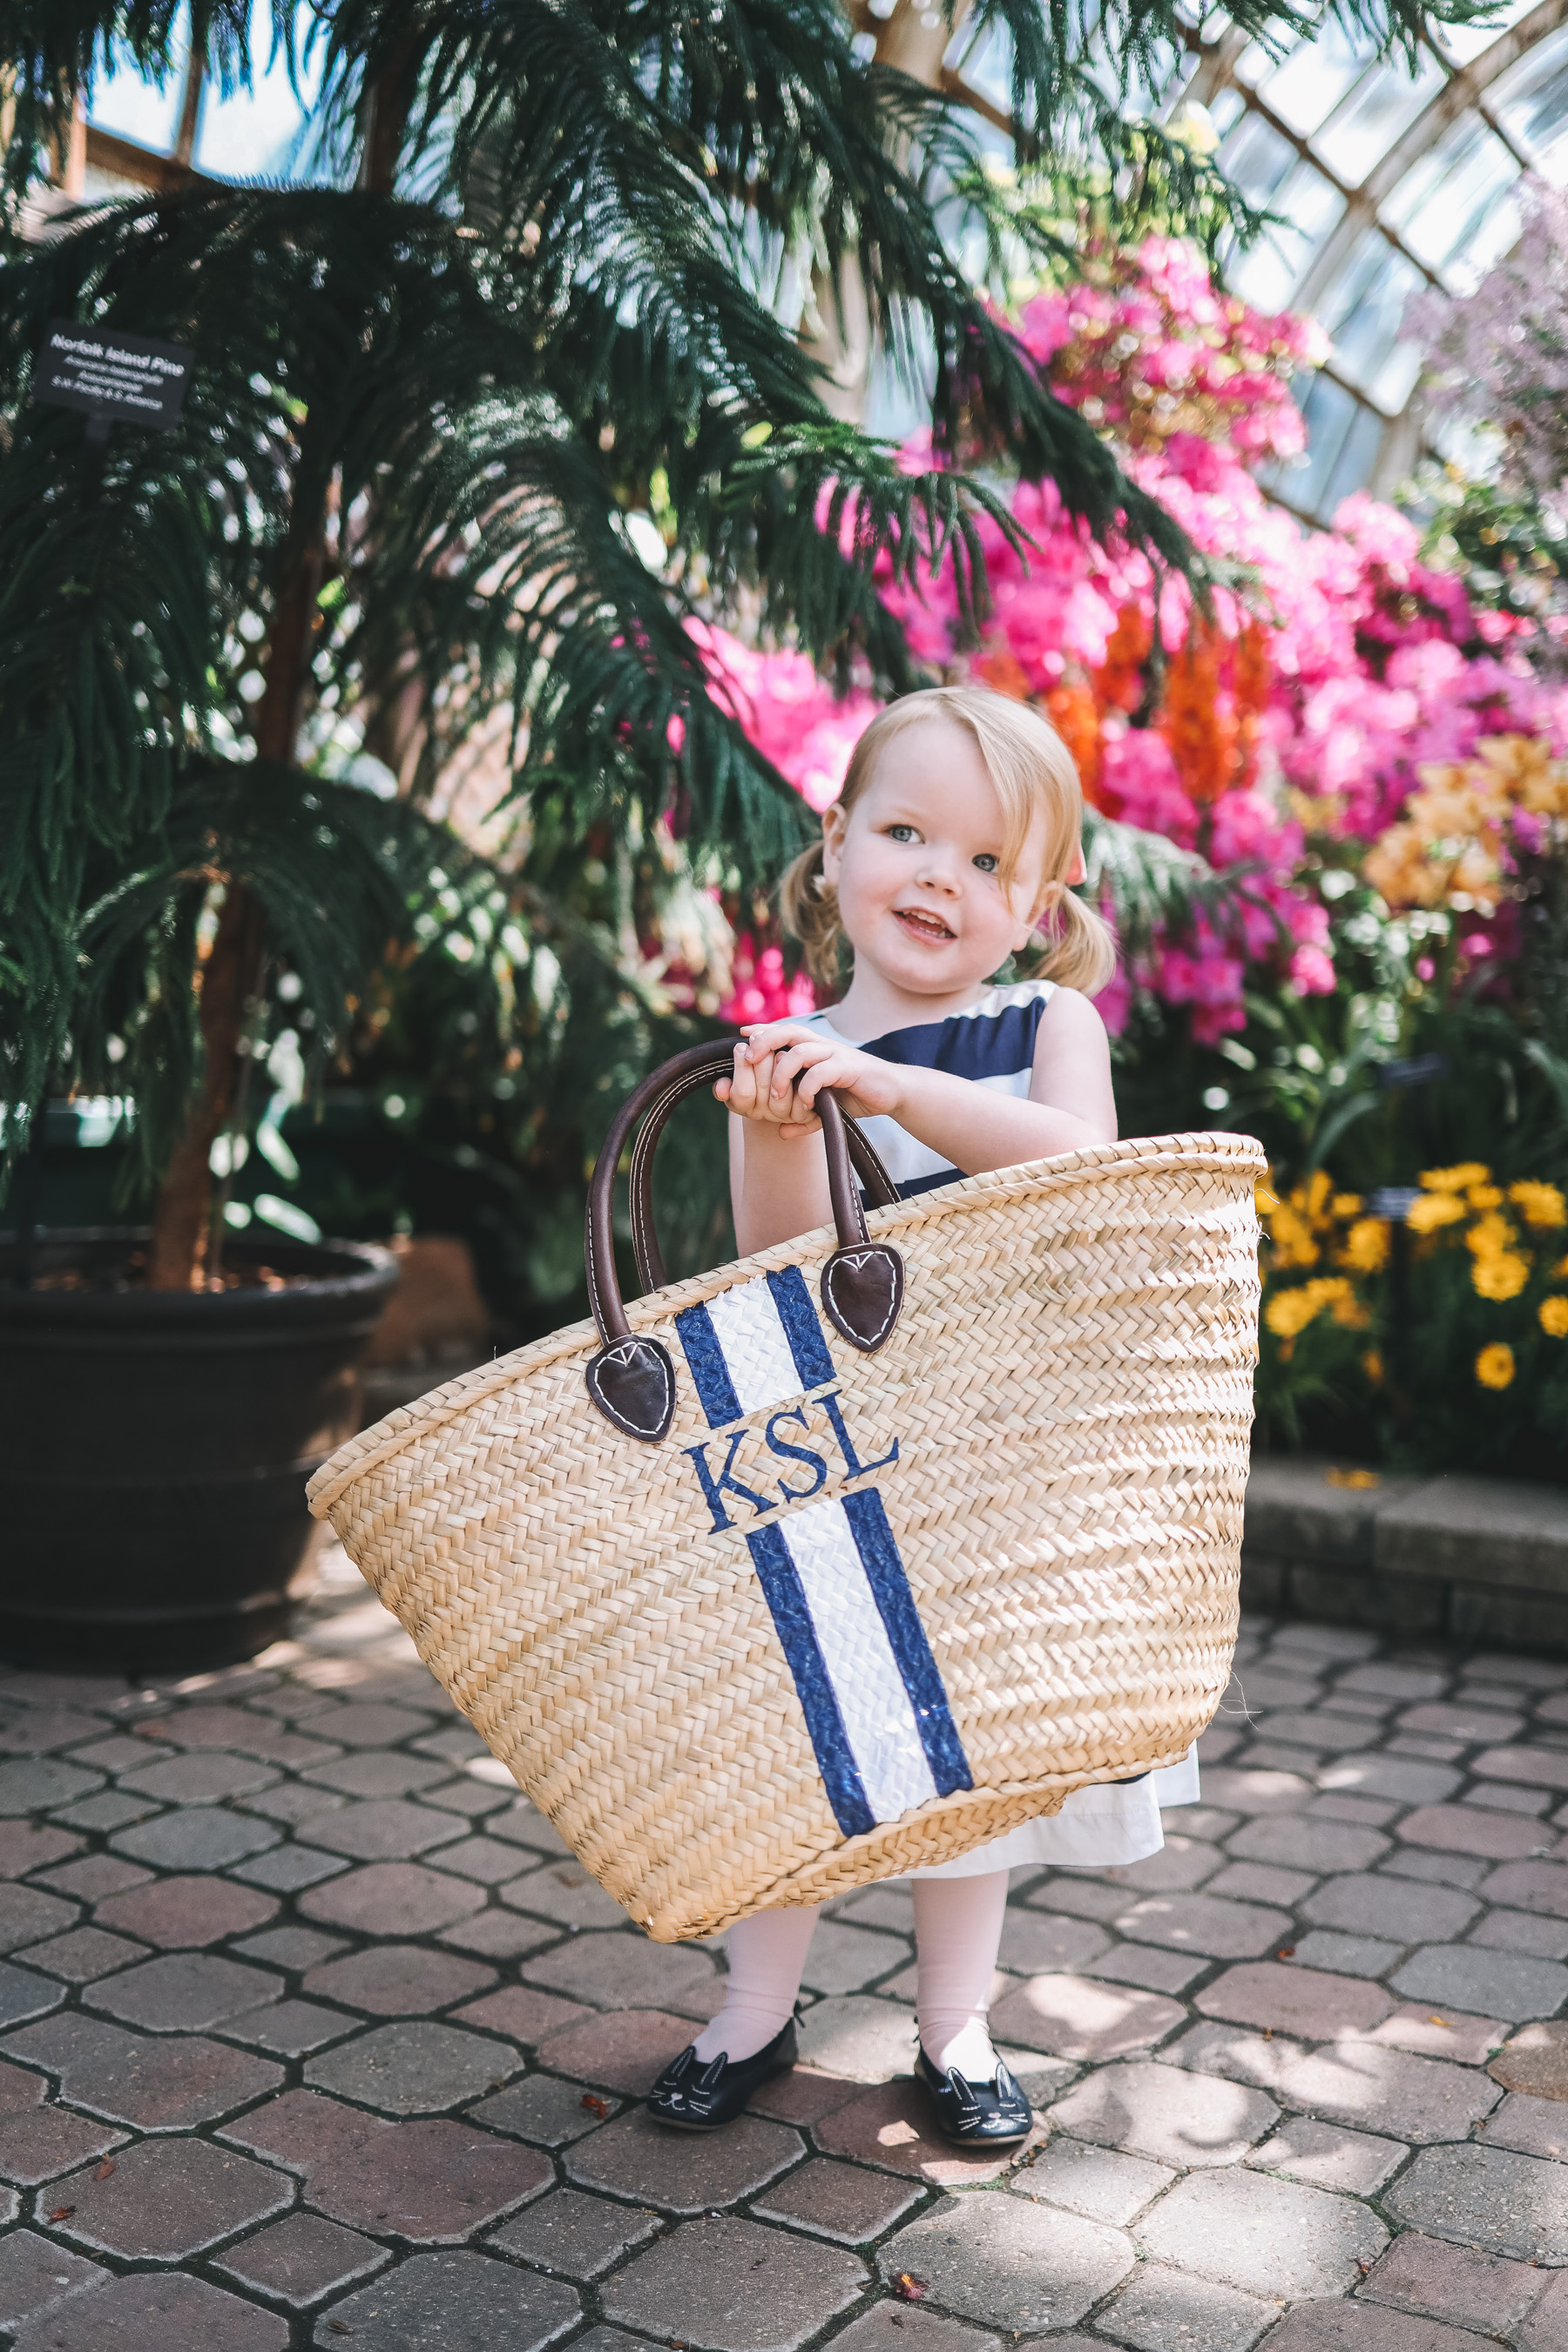 Emma's outfit: J.Crew Factory Navy Striped Dress / Mark & Graham Hand-Painted Straw Tote / Newer Gap Bunny Flats